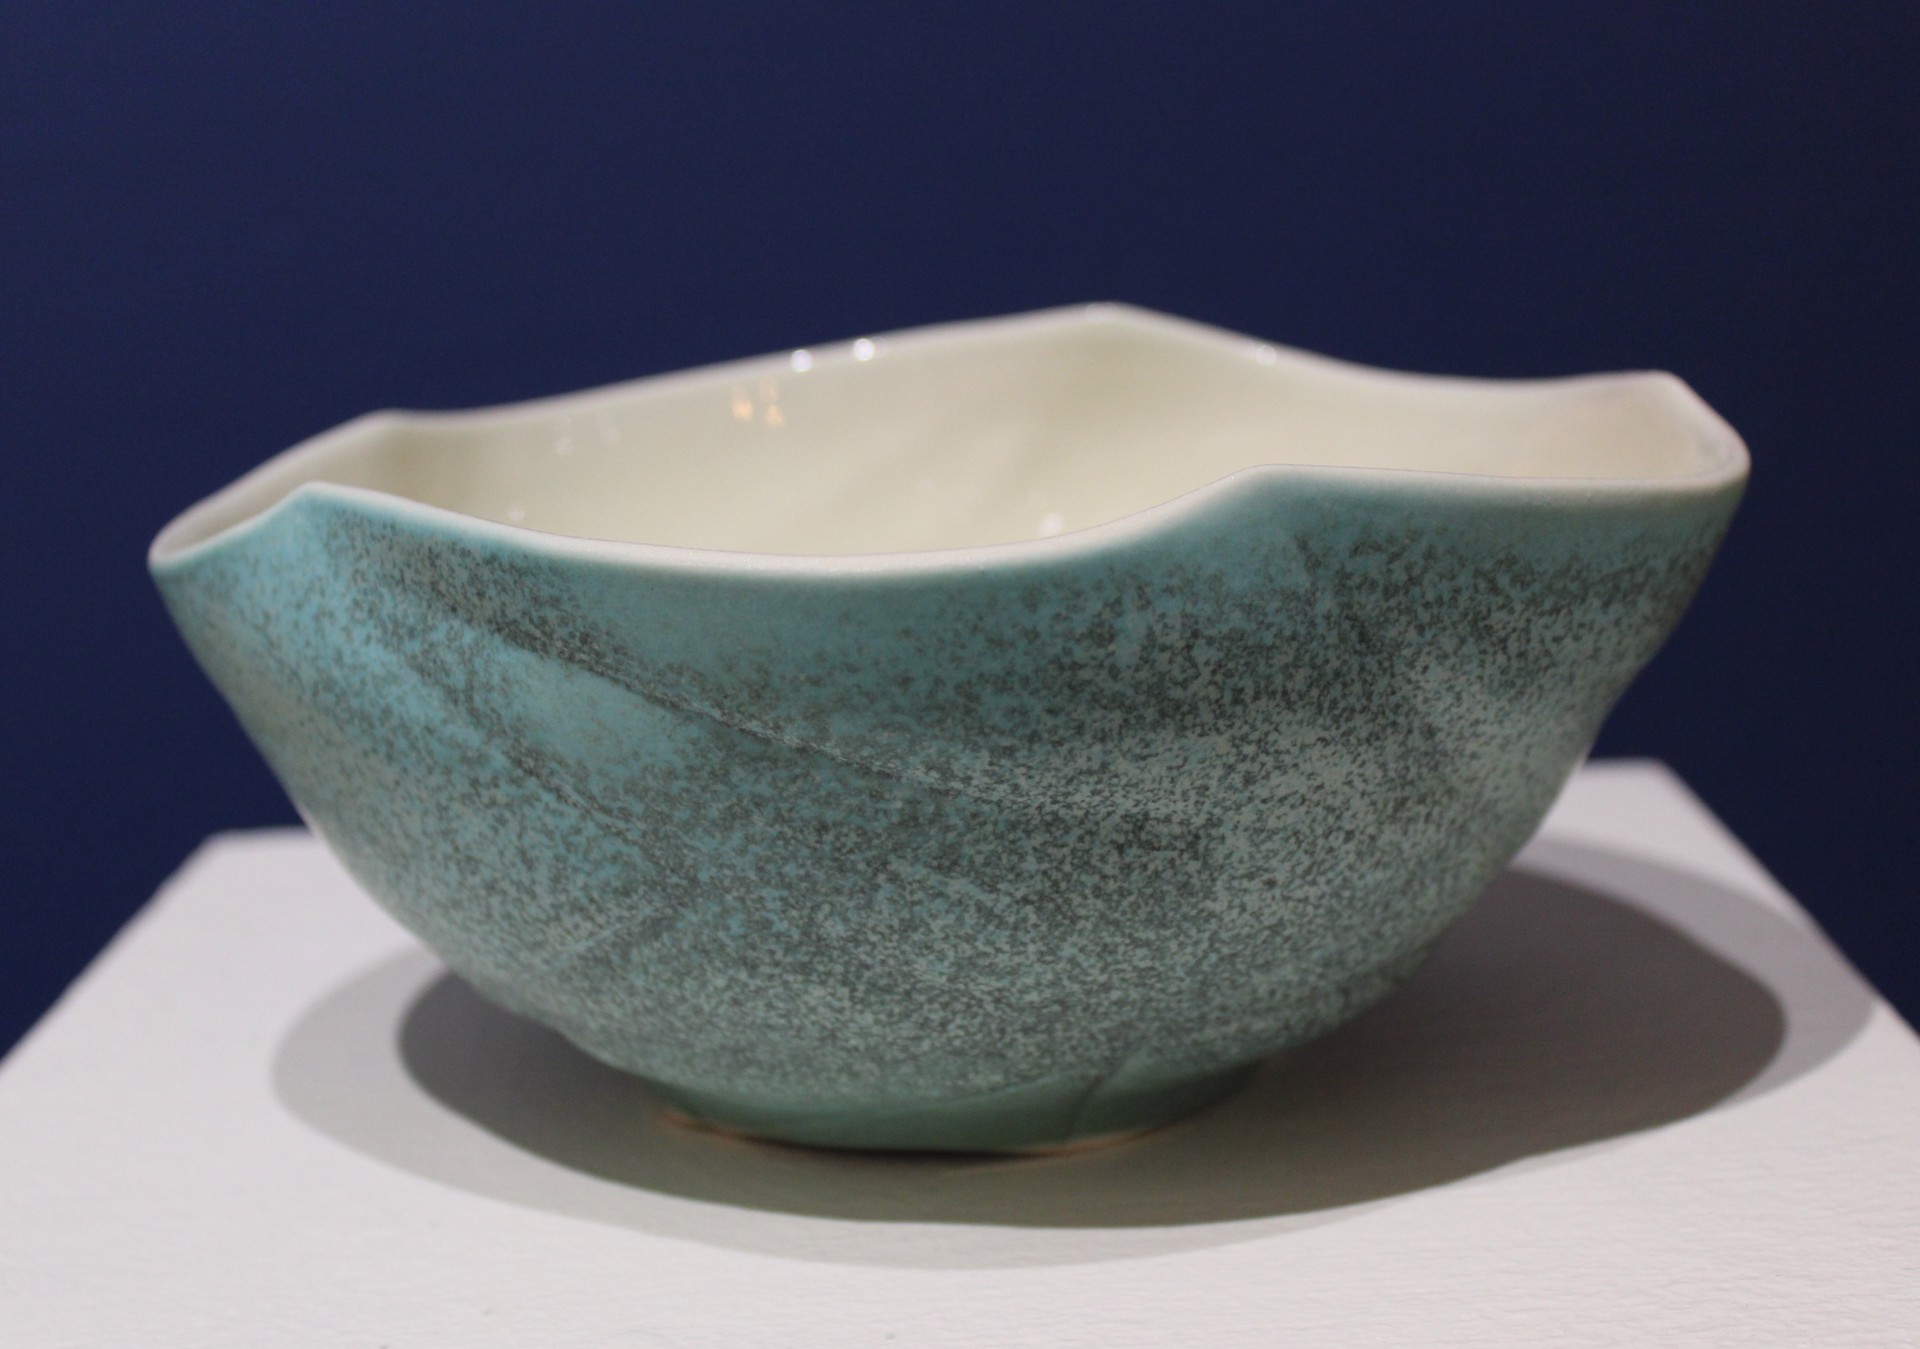 Blue Bowl by Danielle Inabinet